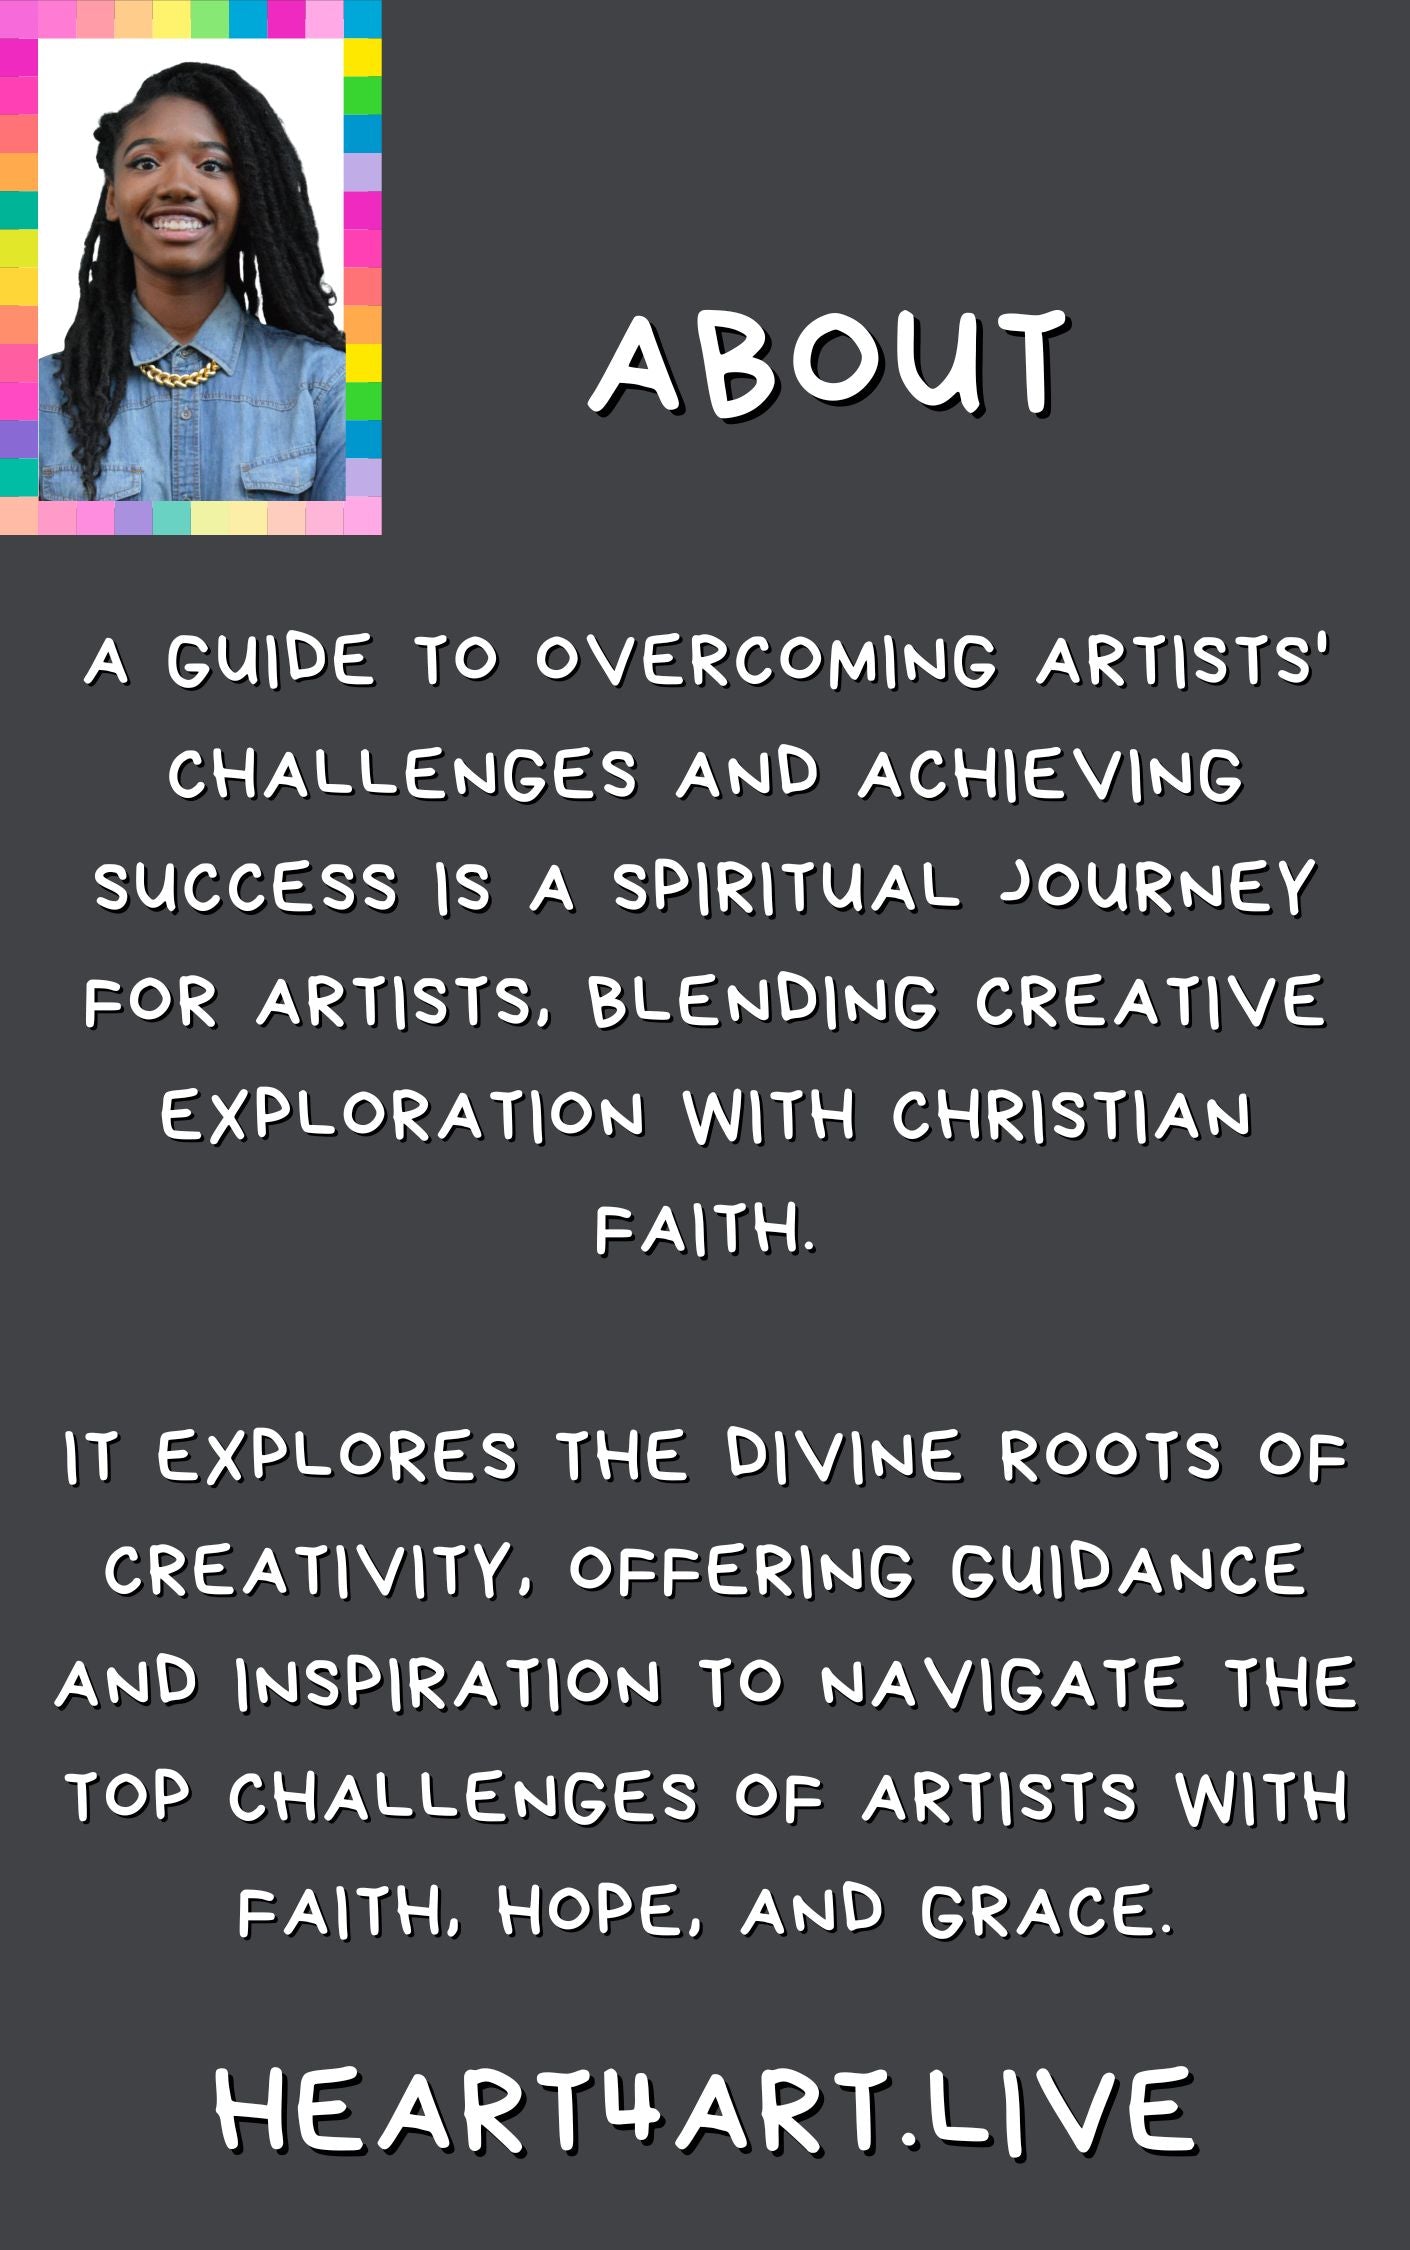 A Guide to Overcoming Artists' Challenges and Achieving Success